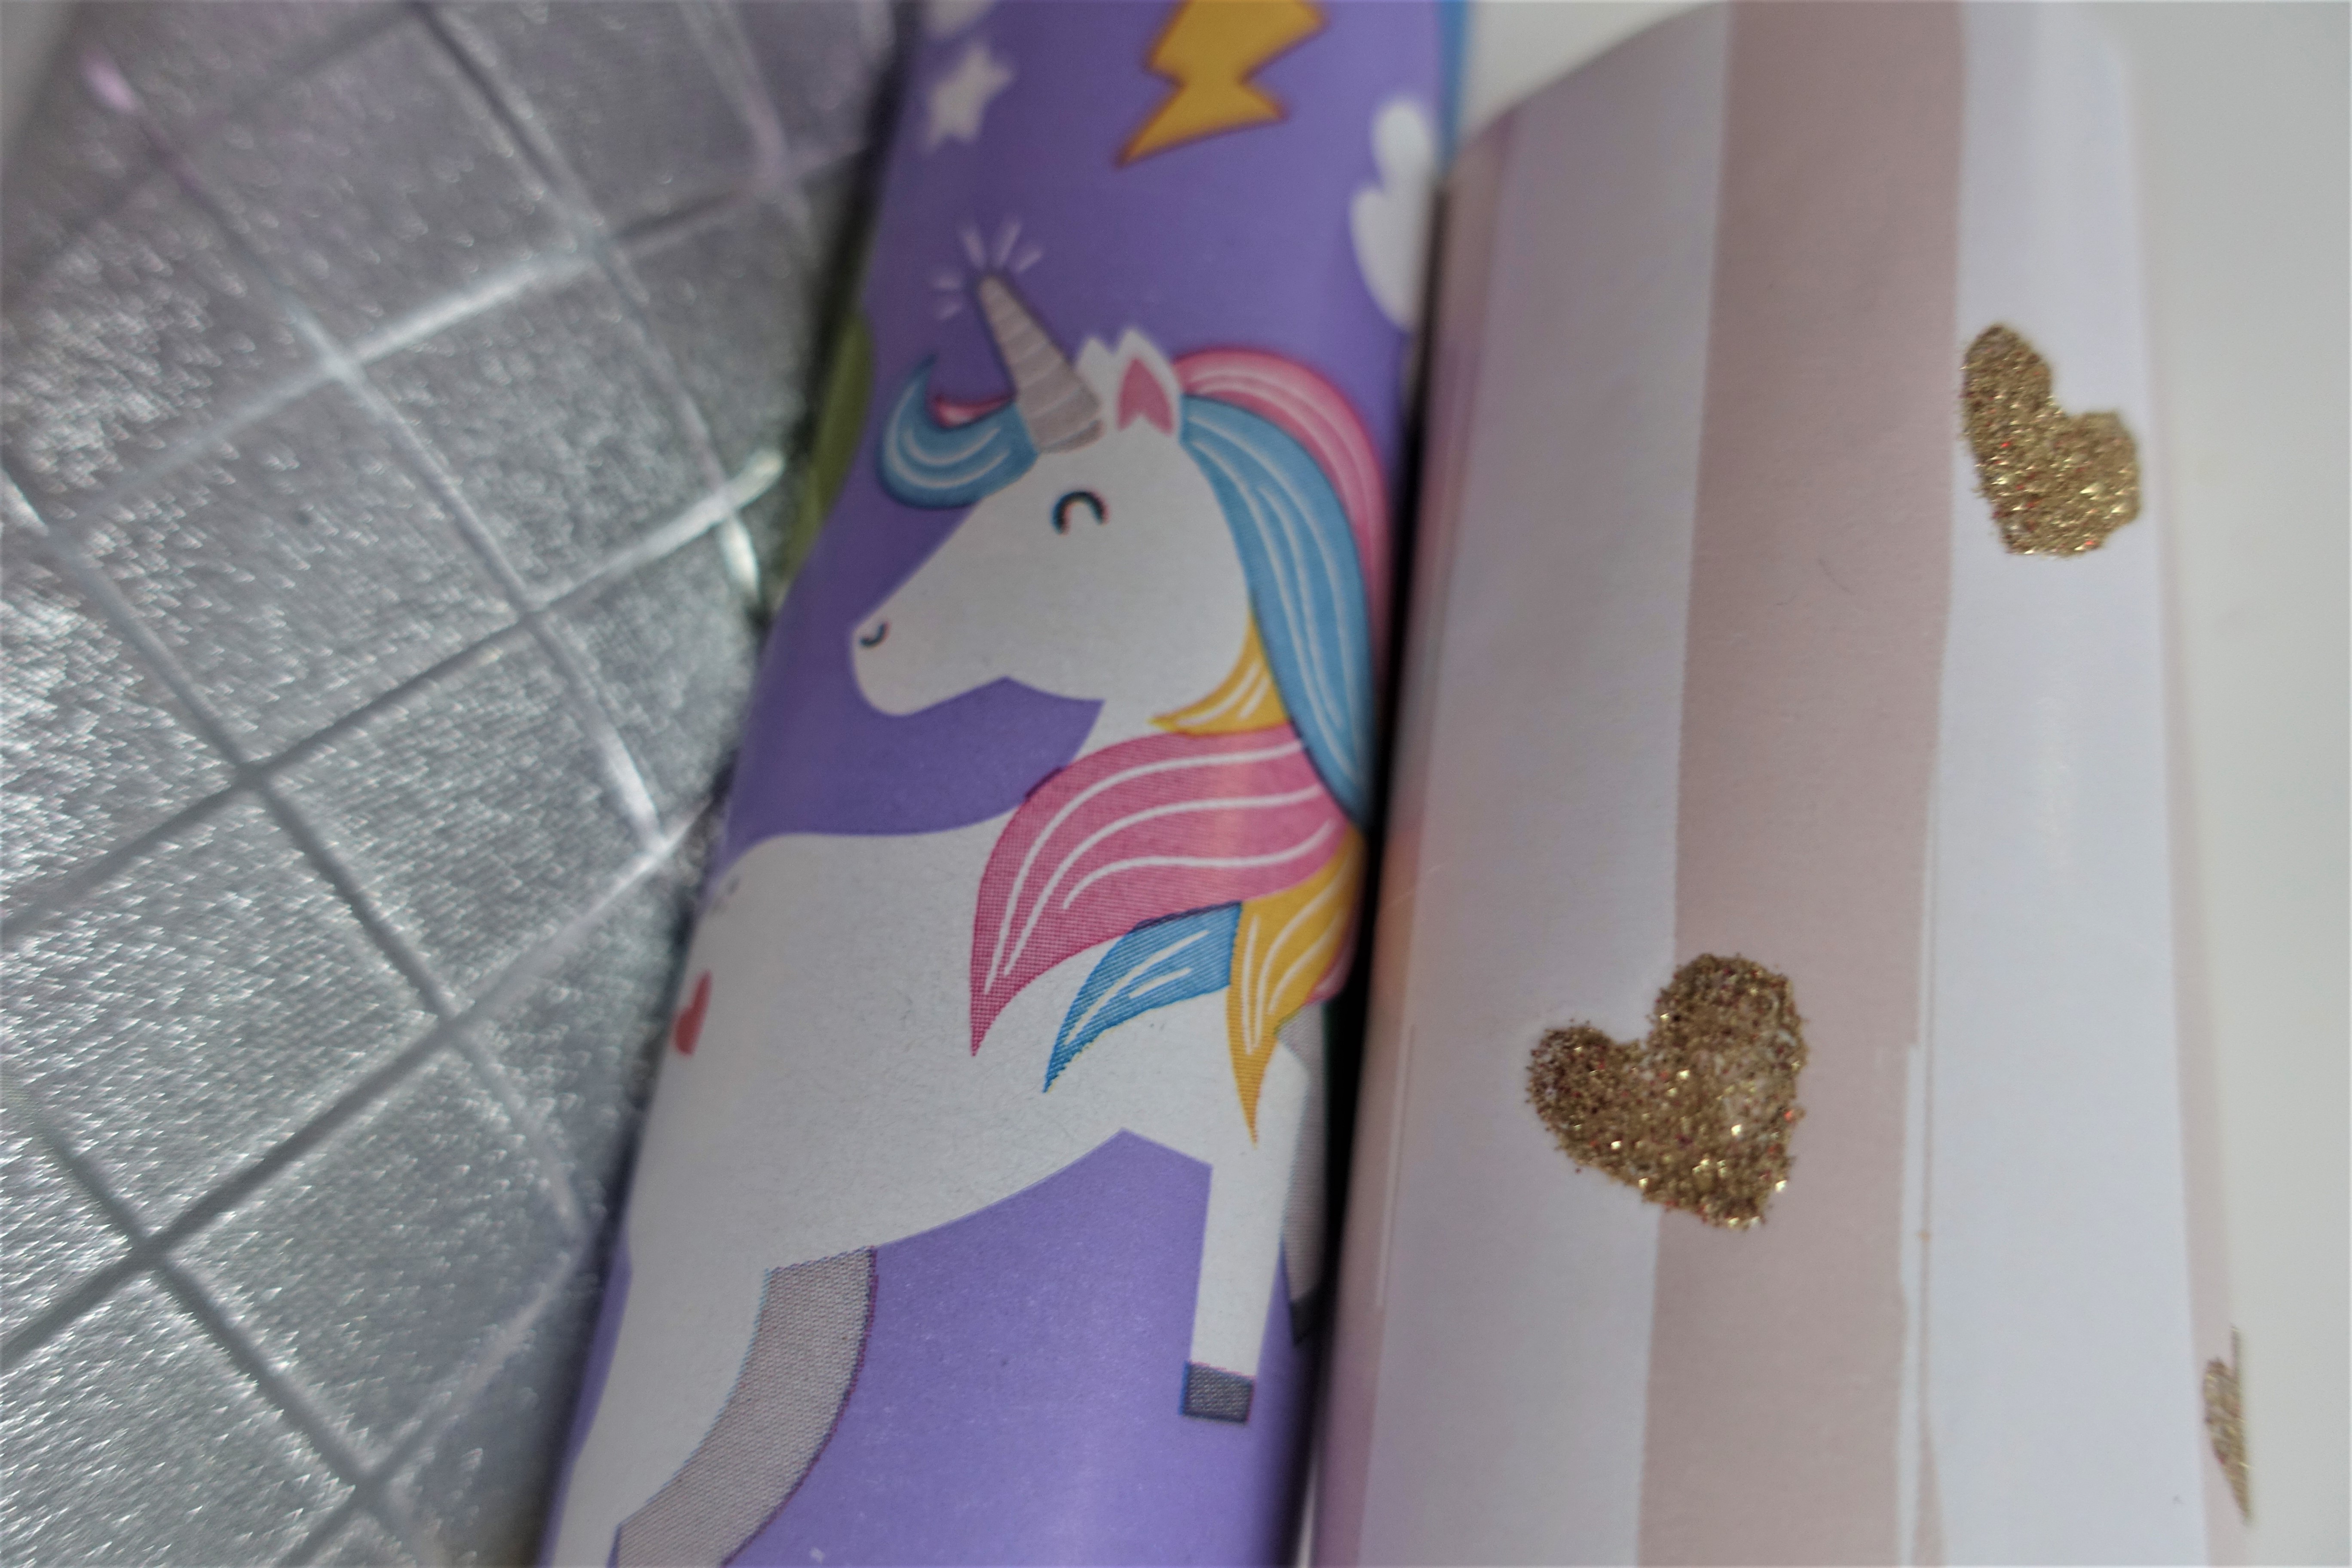 Two rolls of wrapping paper with golden hearts and unicorns each